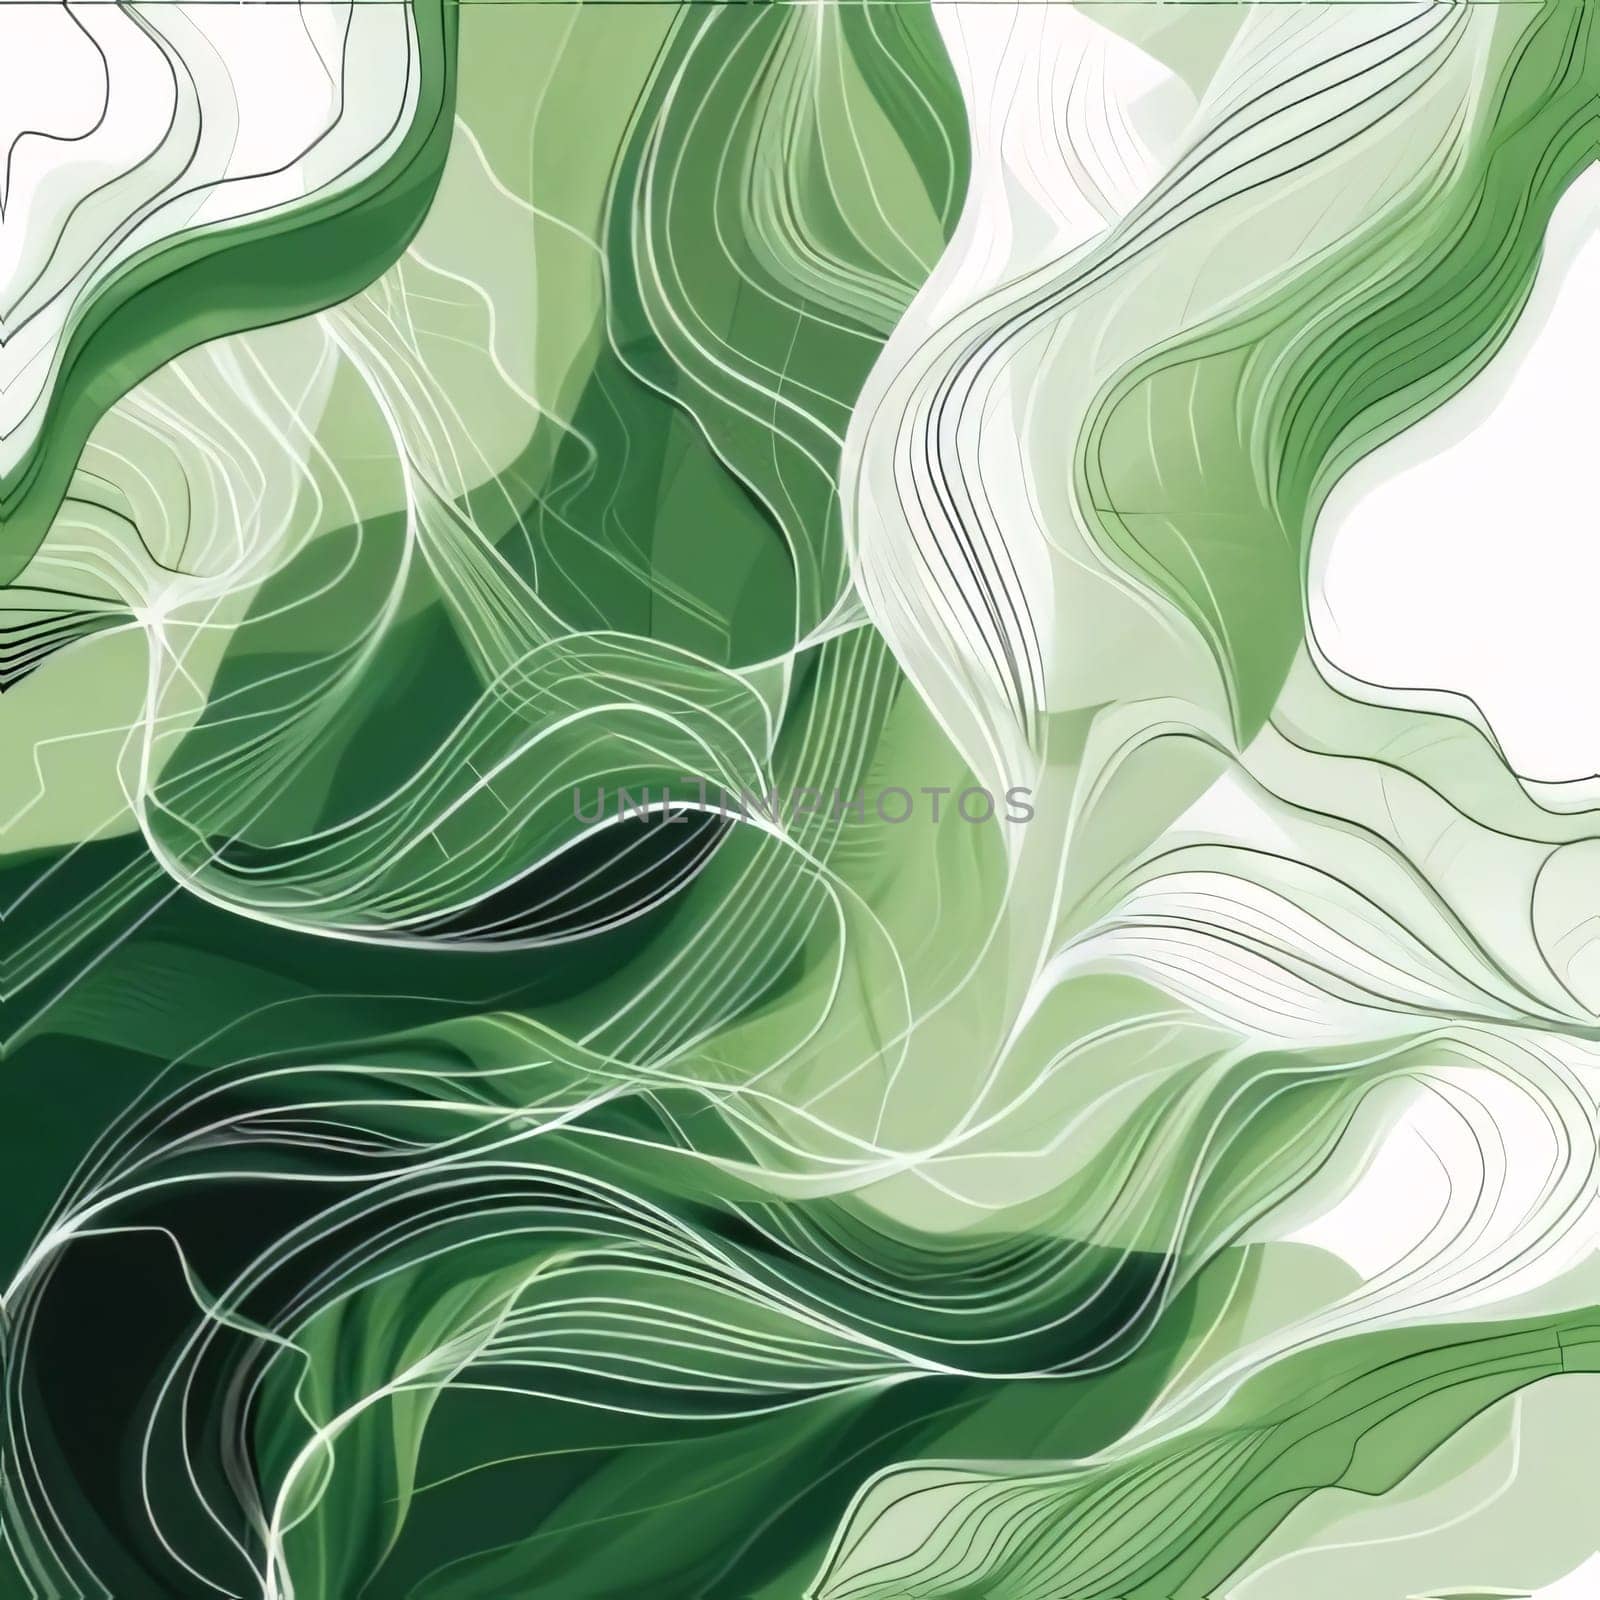 Abstract green background with lines and waves. Vector illustration. Eps 10 by ThemesS